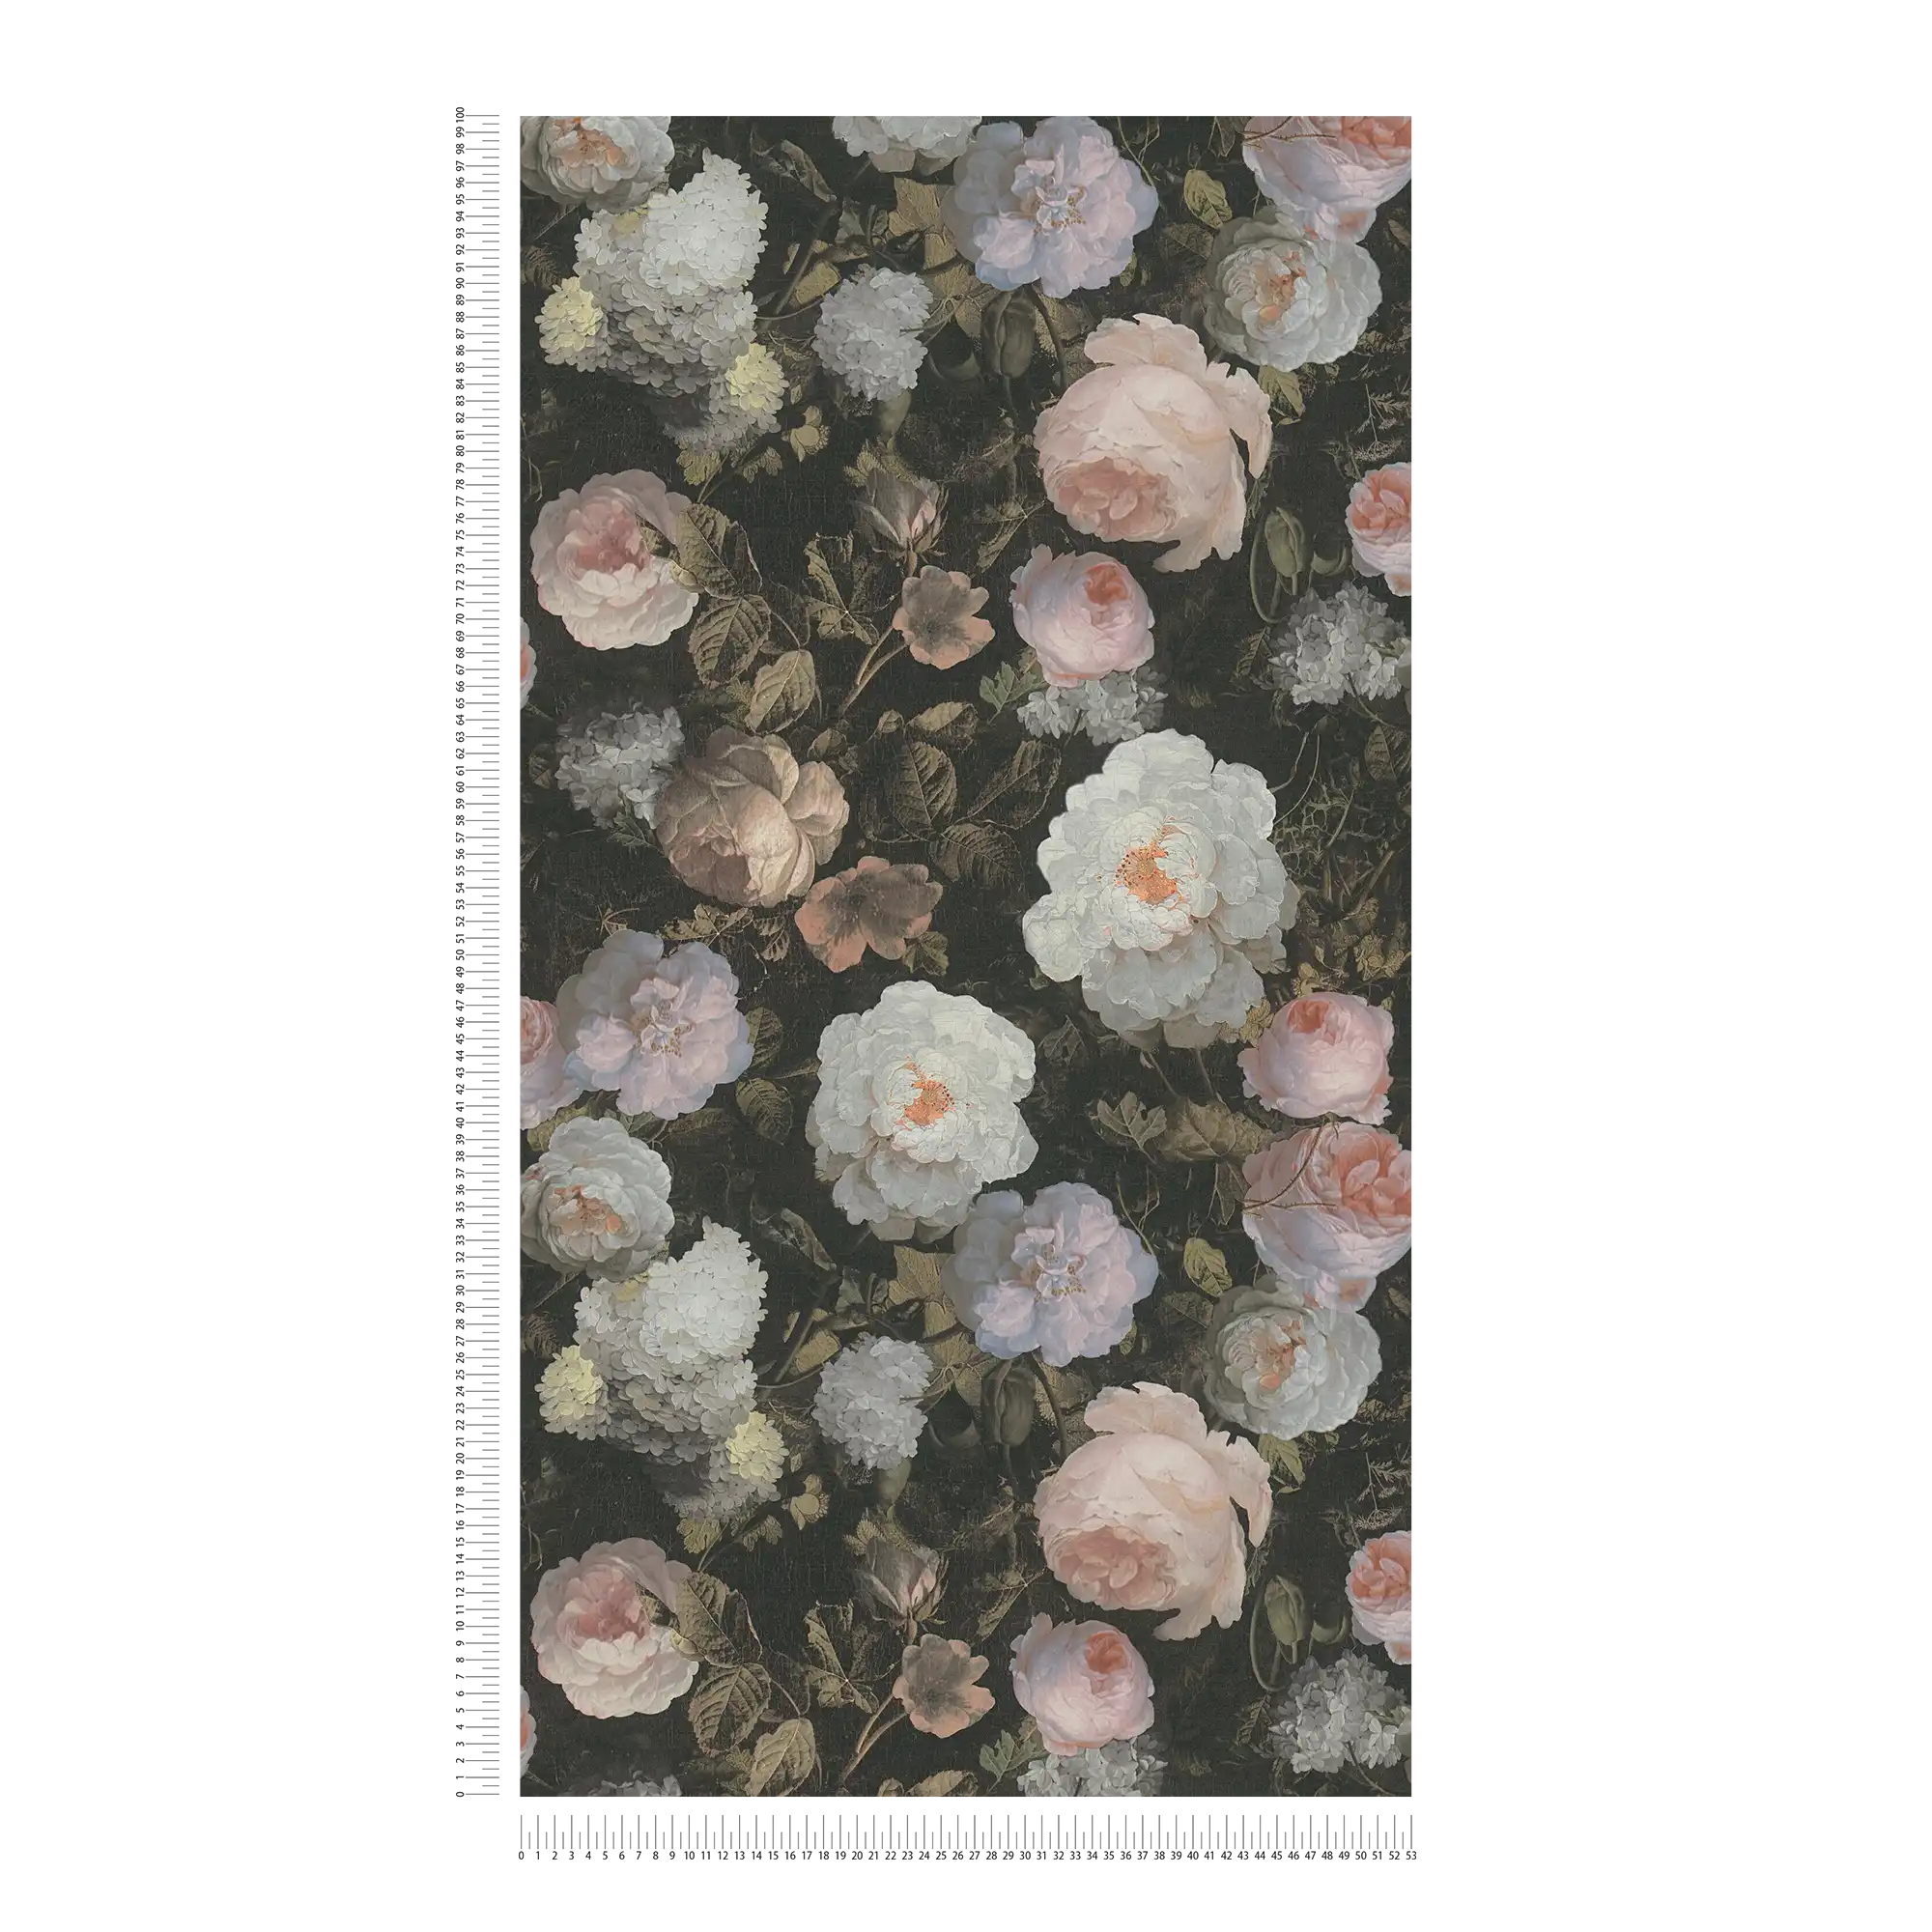             Rose wallpaper with floral pattern - pink, green, white
        